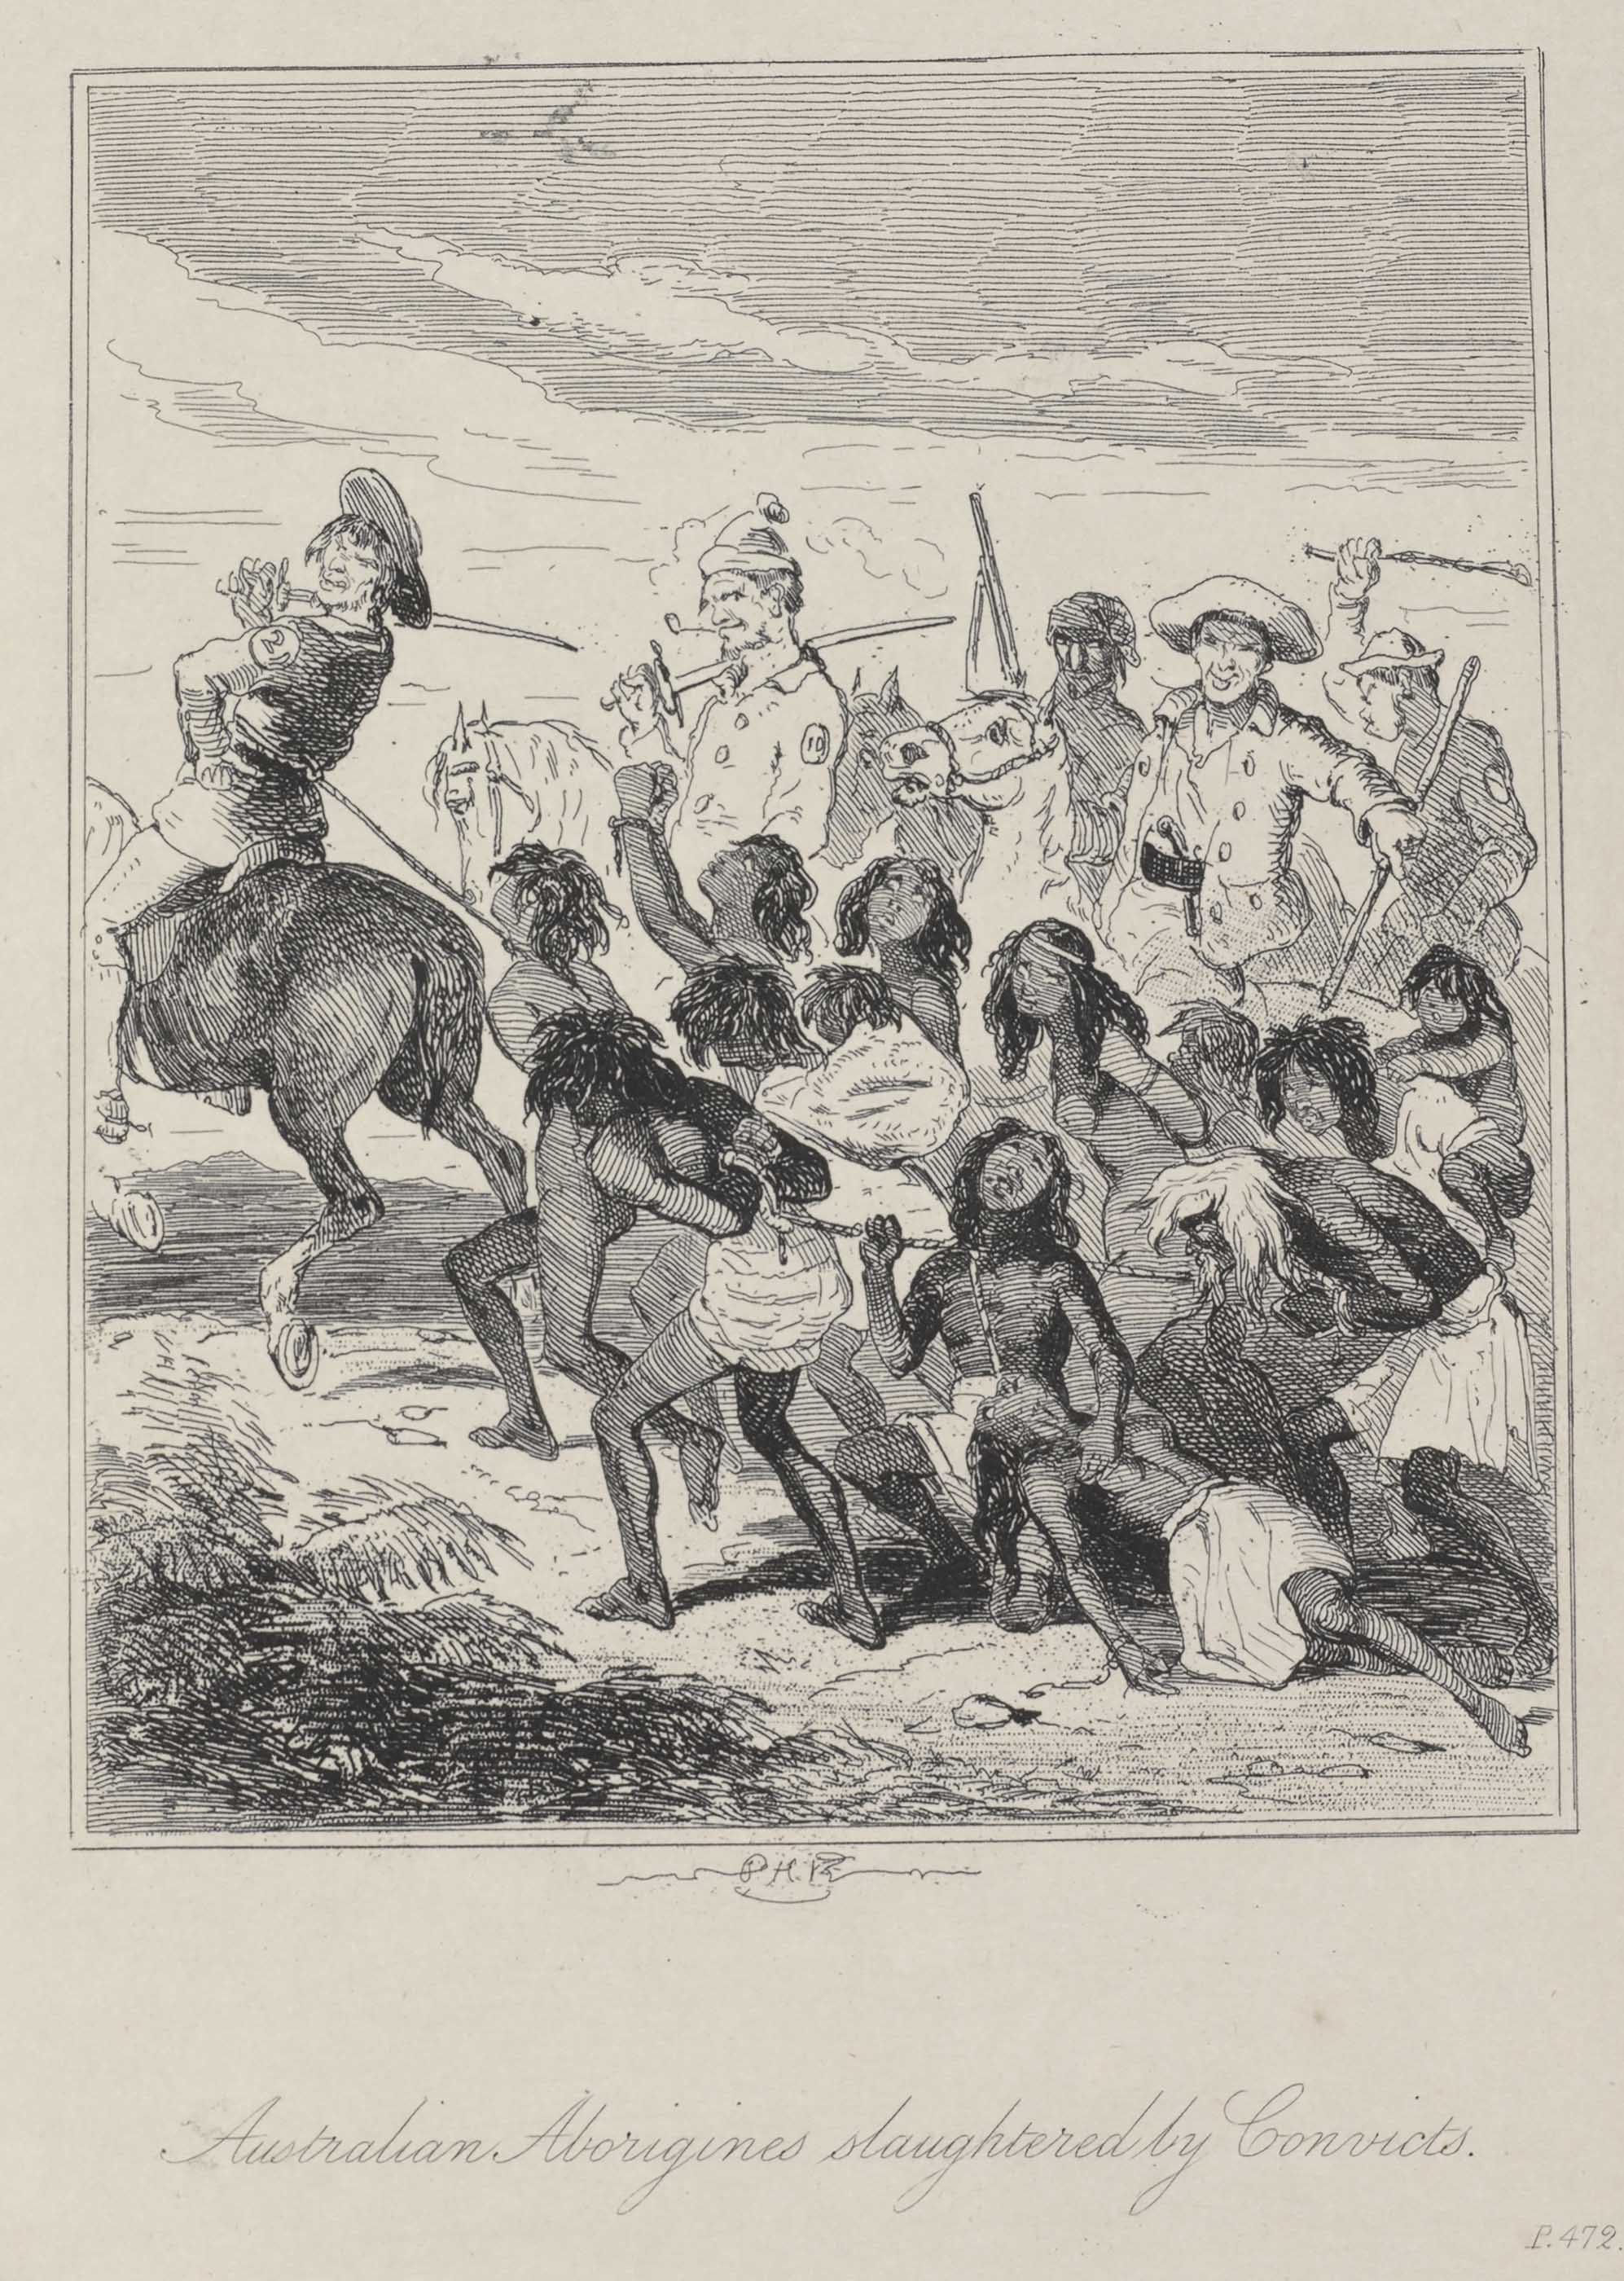 <p><em>Australian Aborigines Slaughtered by Convicts</em>,&nbsp;1840s, by Phiz</p>
